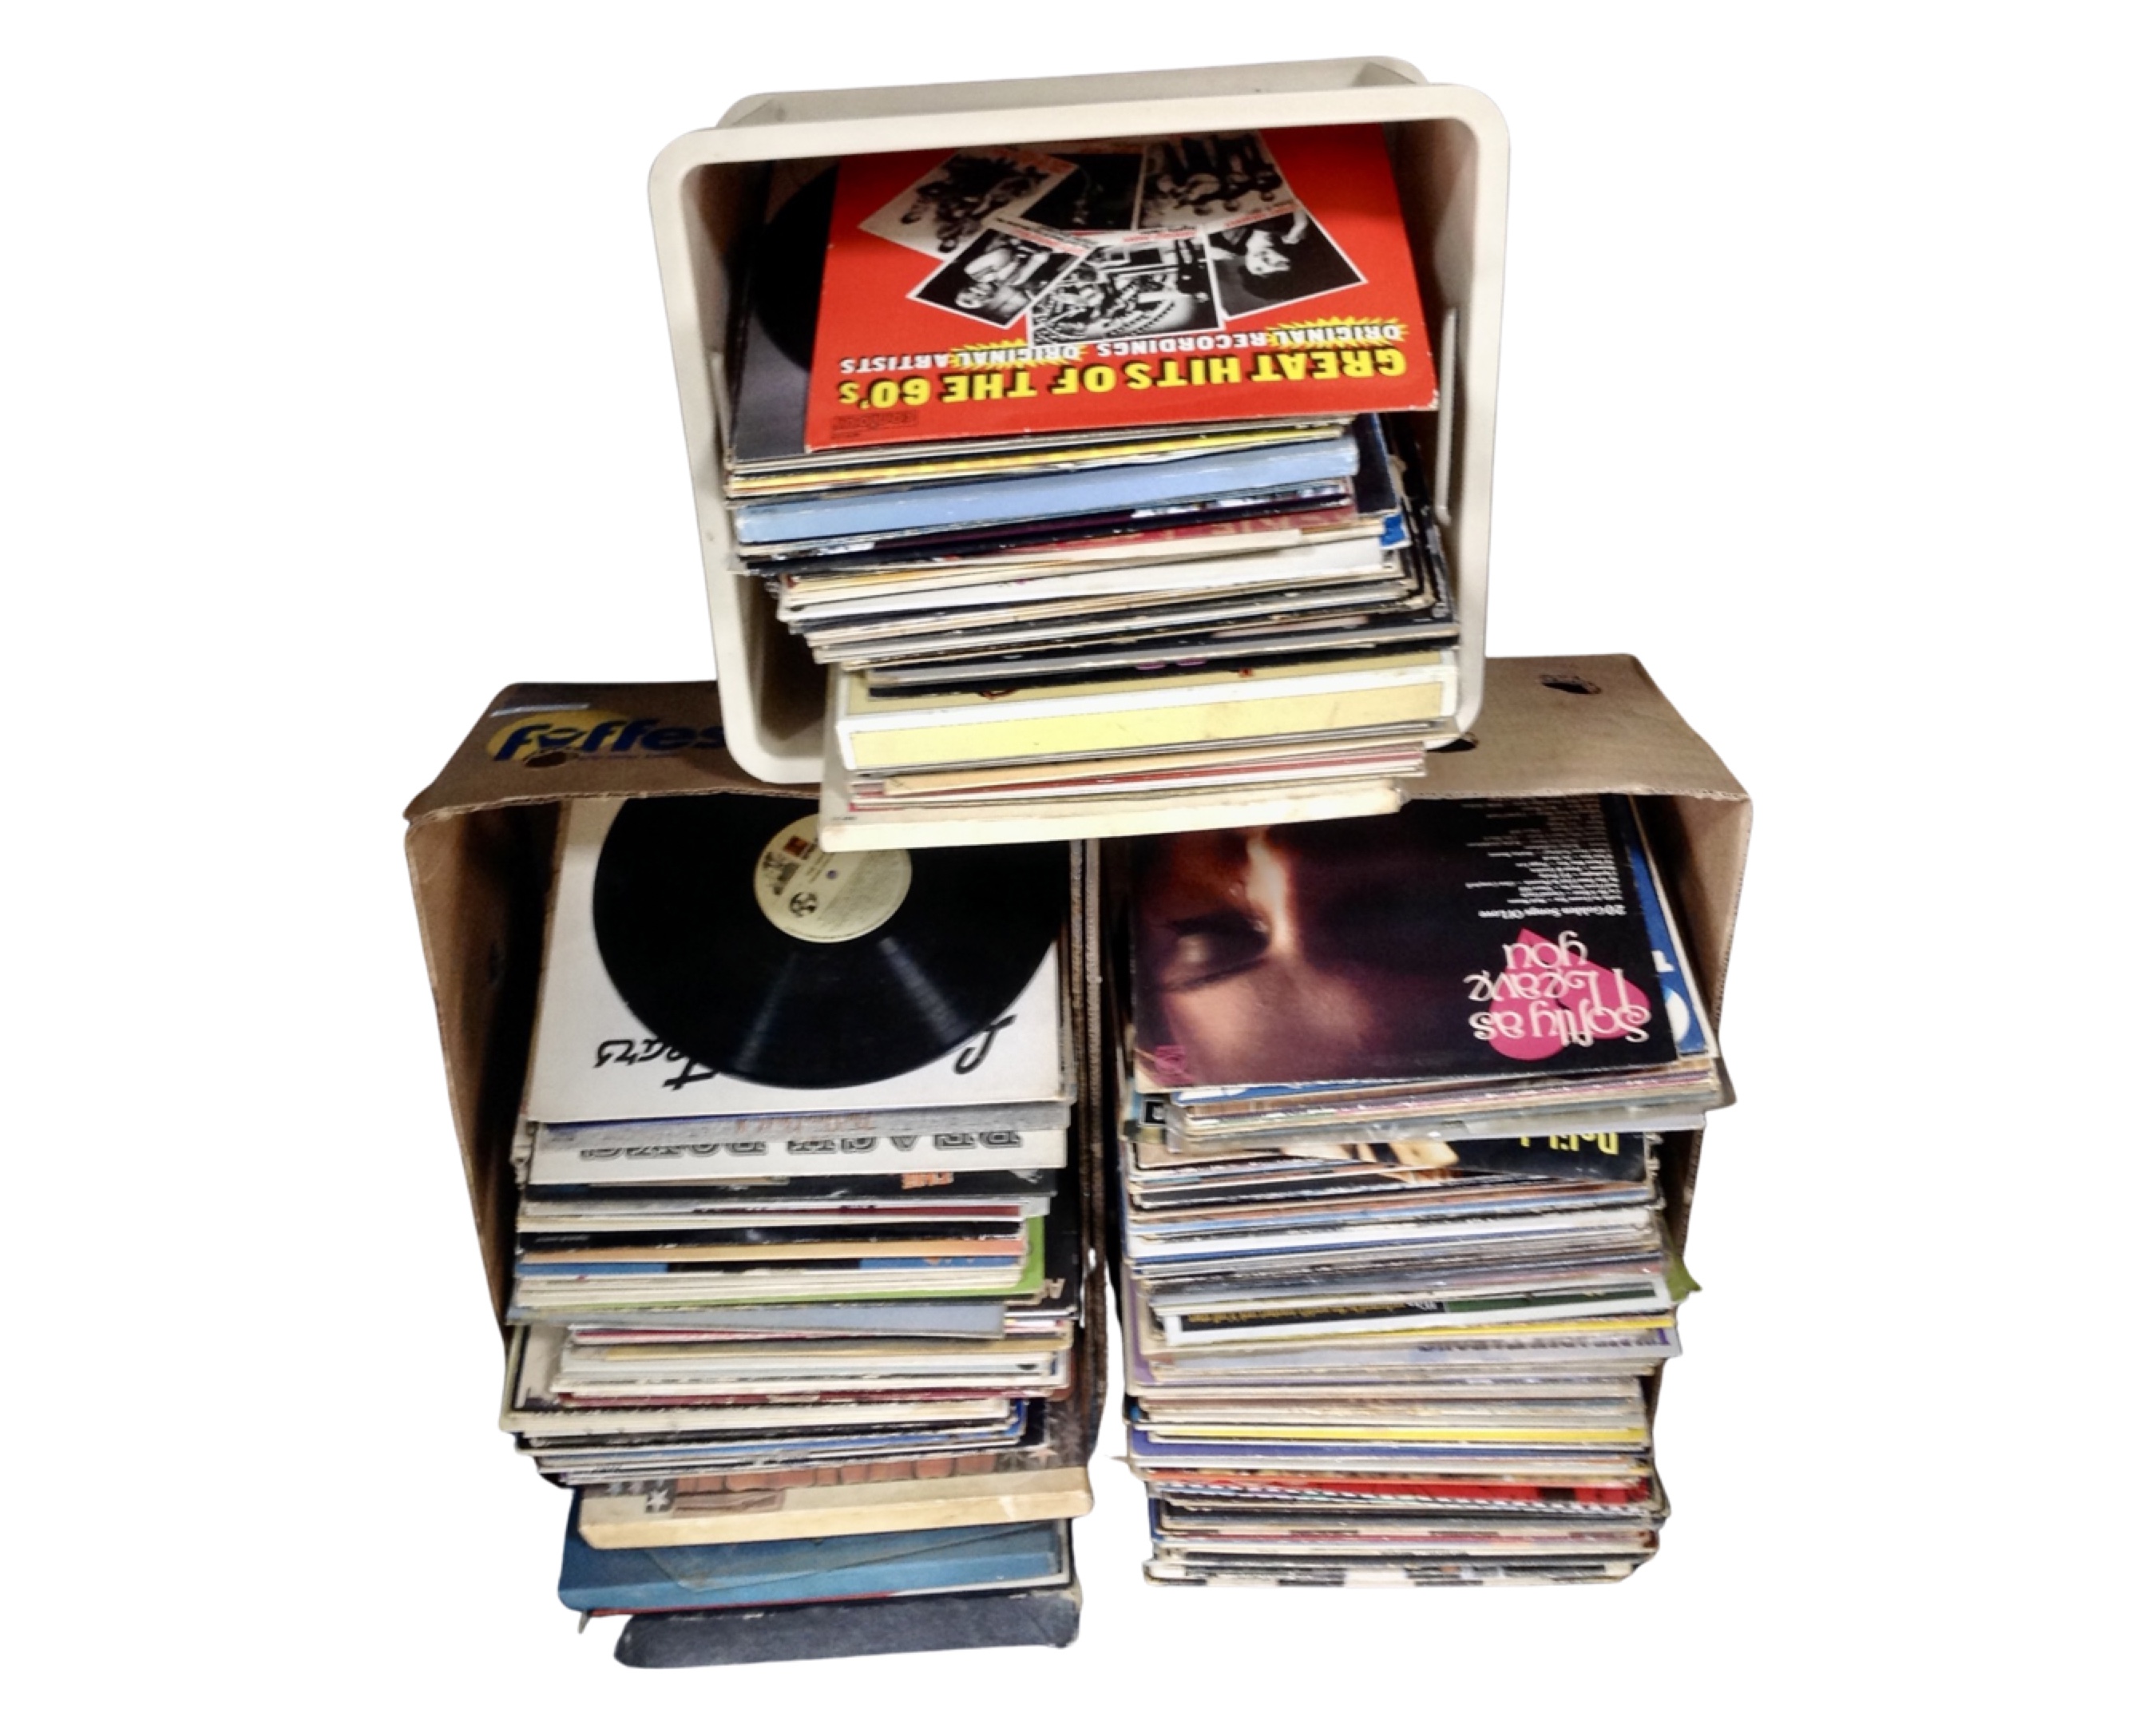 Two boxes and a crate containing vinyl records including Blondie, Rod Stewart, compilations,